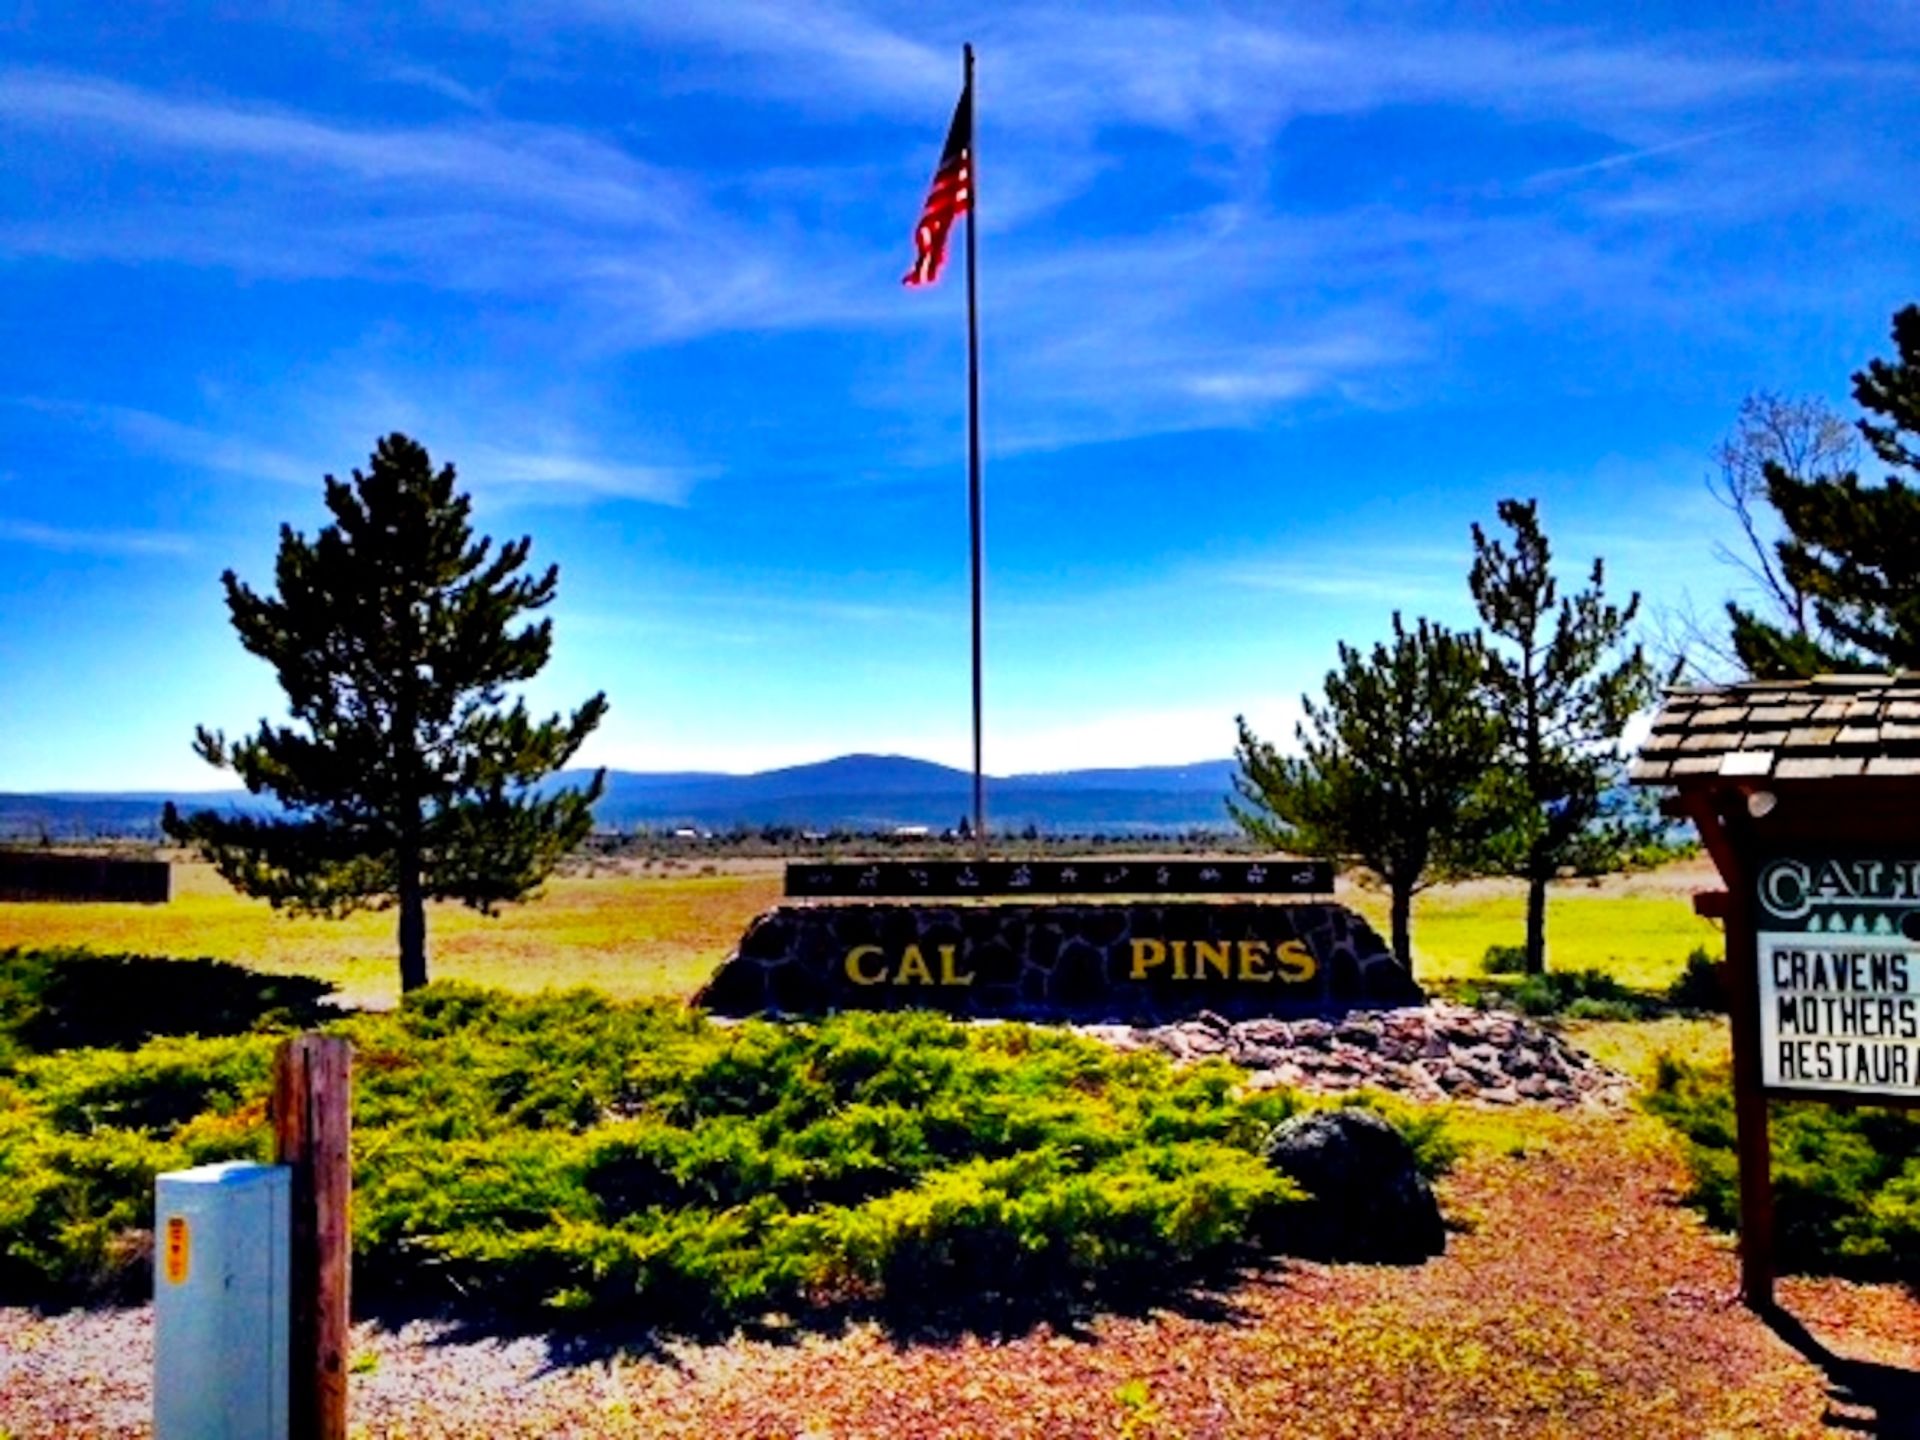 Build Your Sanctuary in the Peaceful Pine Woods of Modoc County, California! - Image 11 of 16